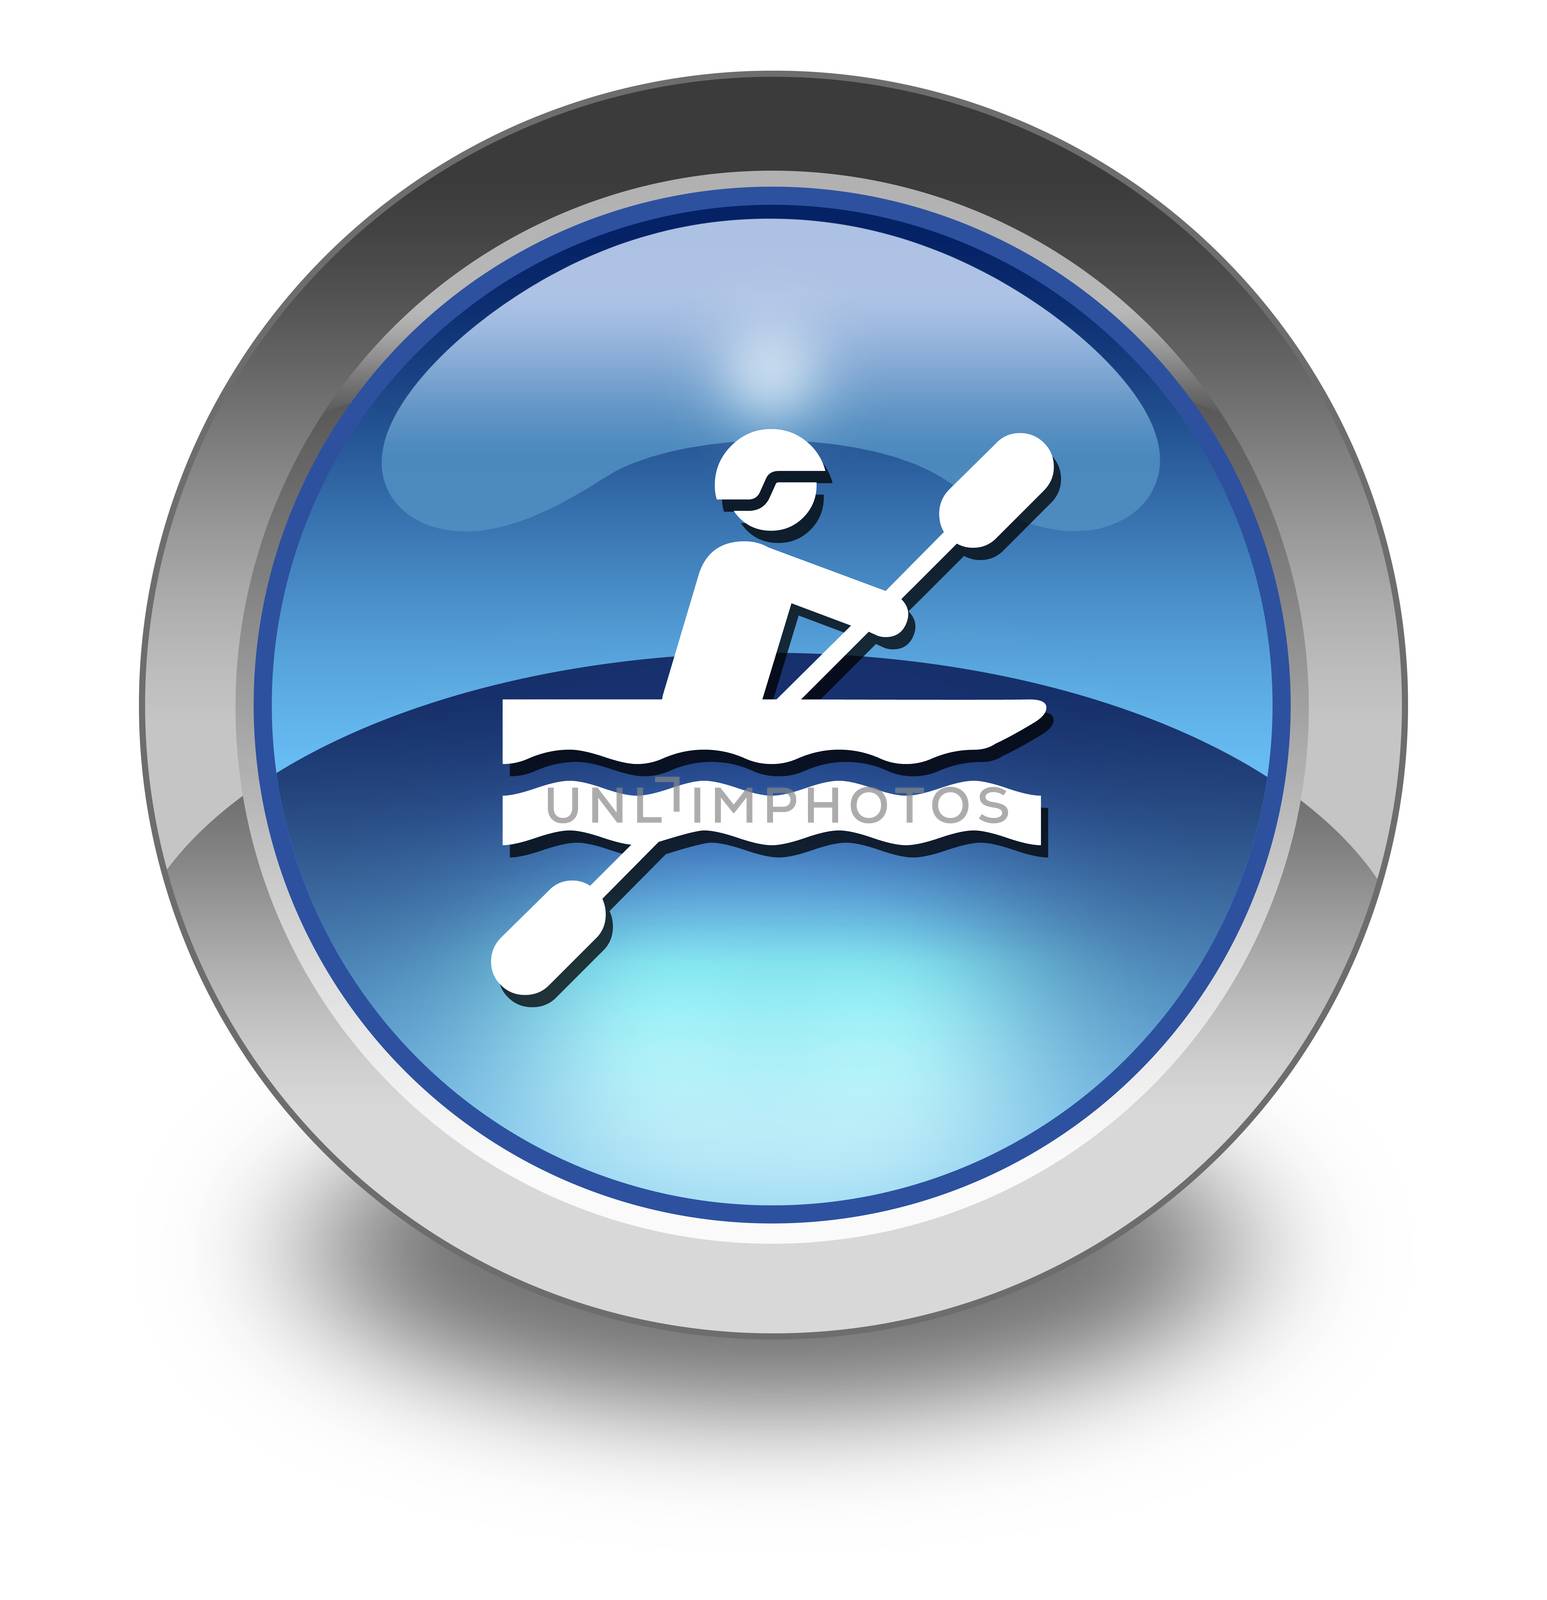 Icon, Button, Pictogram with Kayaking symbol